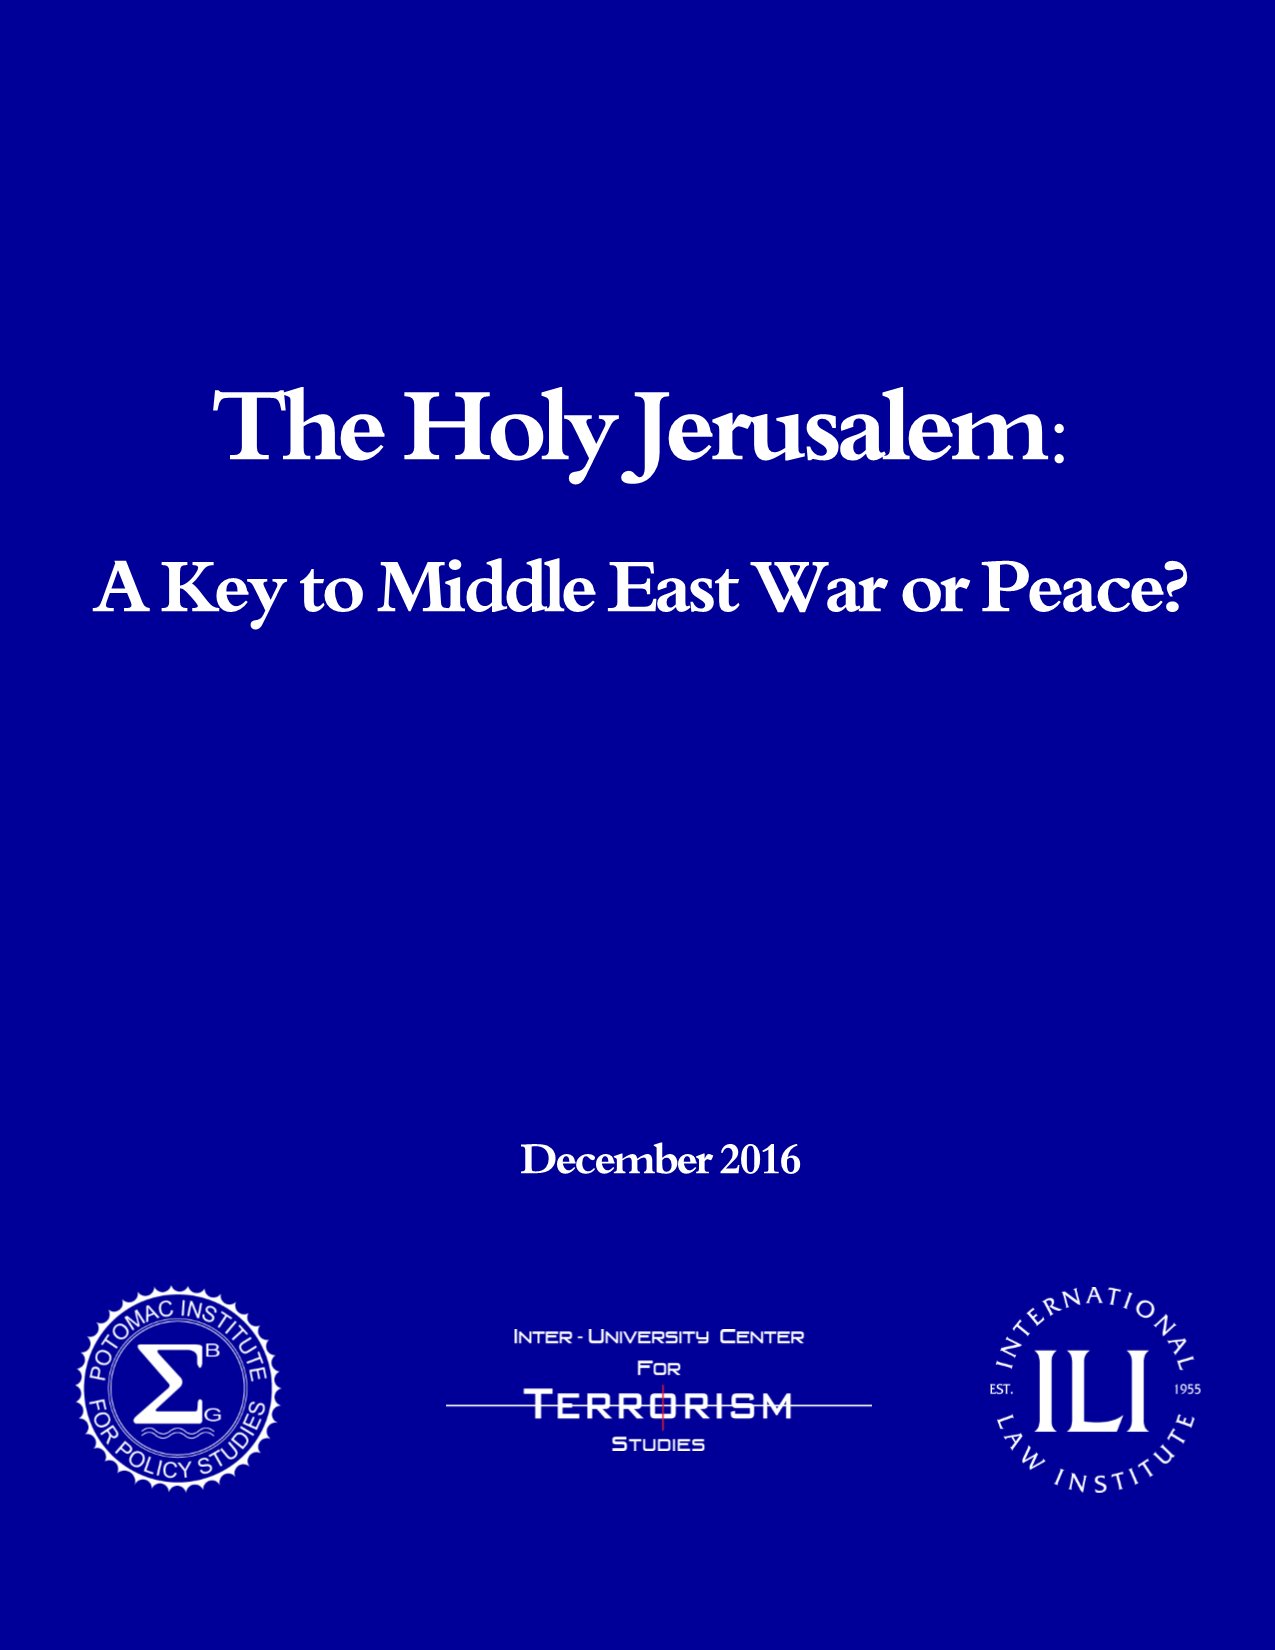 The Holy Jerusalem: A Key to Middle East War or Peace?